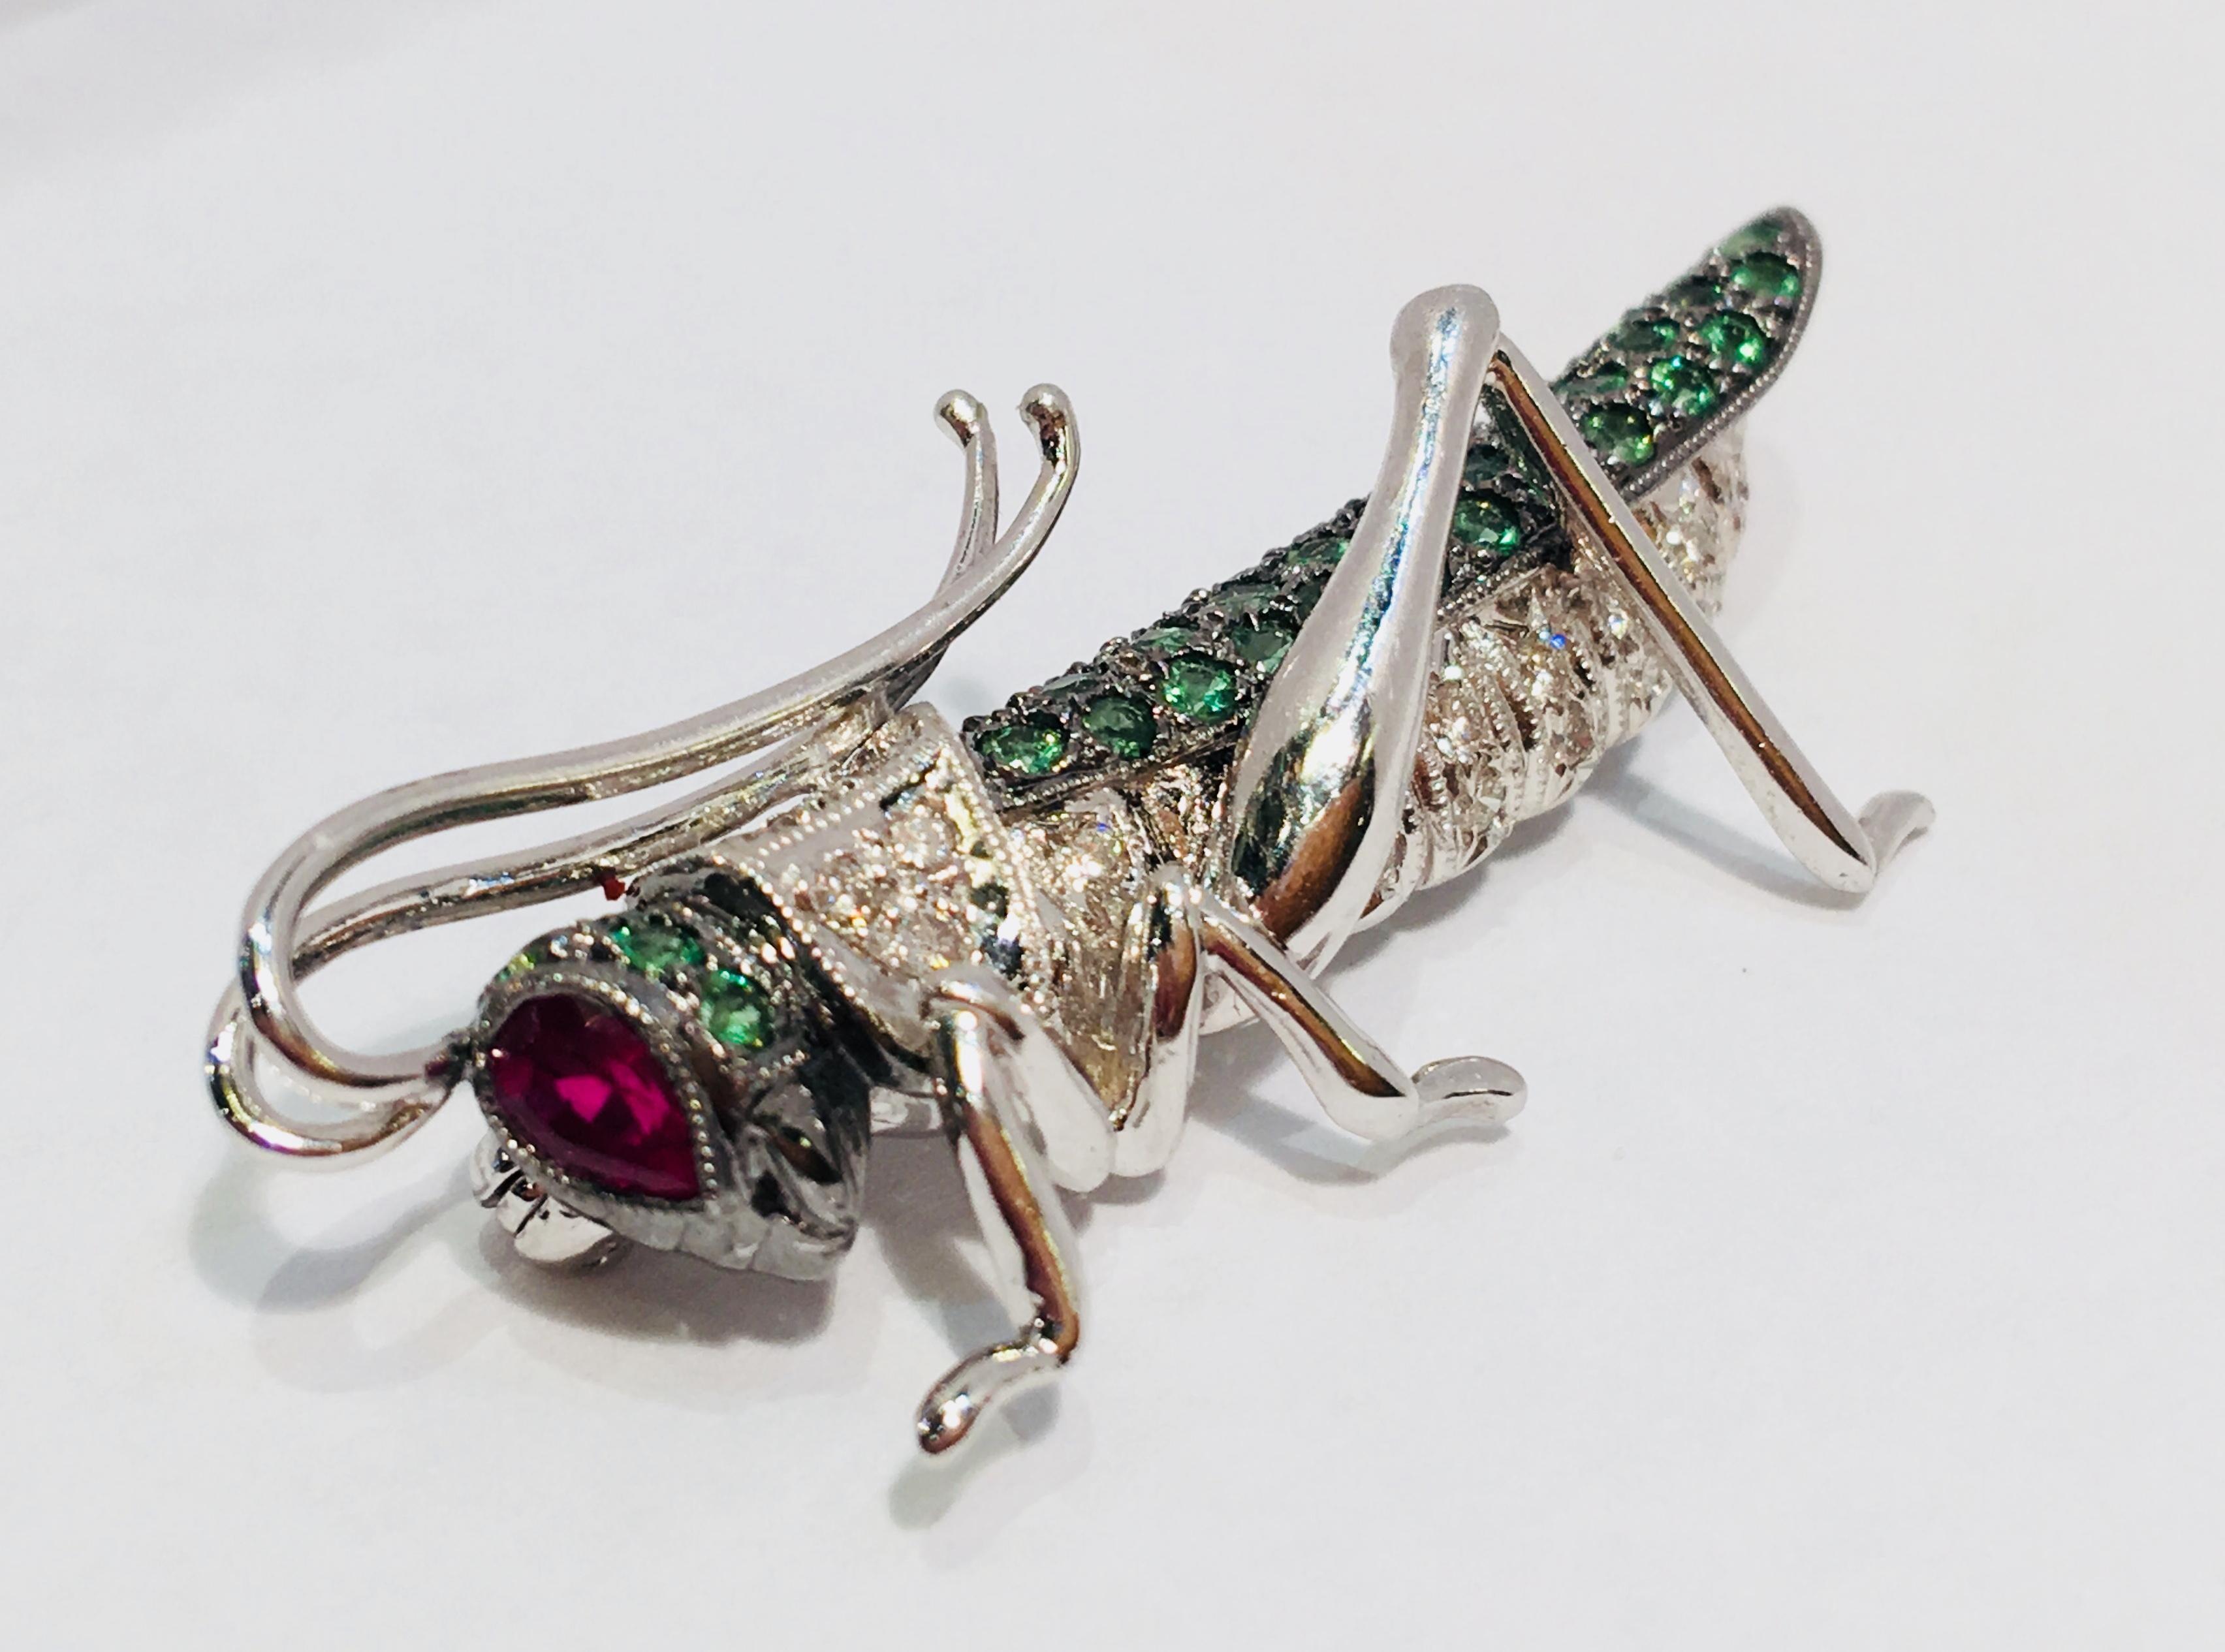 Adorable 18 karat white gold brooch pin in the shape of a whimsical grasshopper or cricket features a pave set round brilliant diamond body, pave set green tsavorite head and wing, and a pear shaped, bezel set ruby eye, as well as highly polished